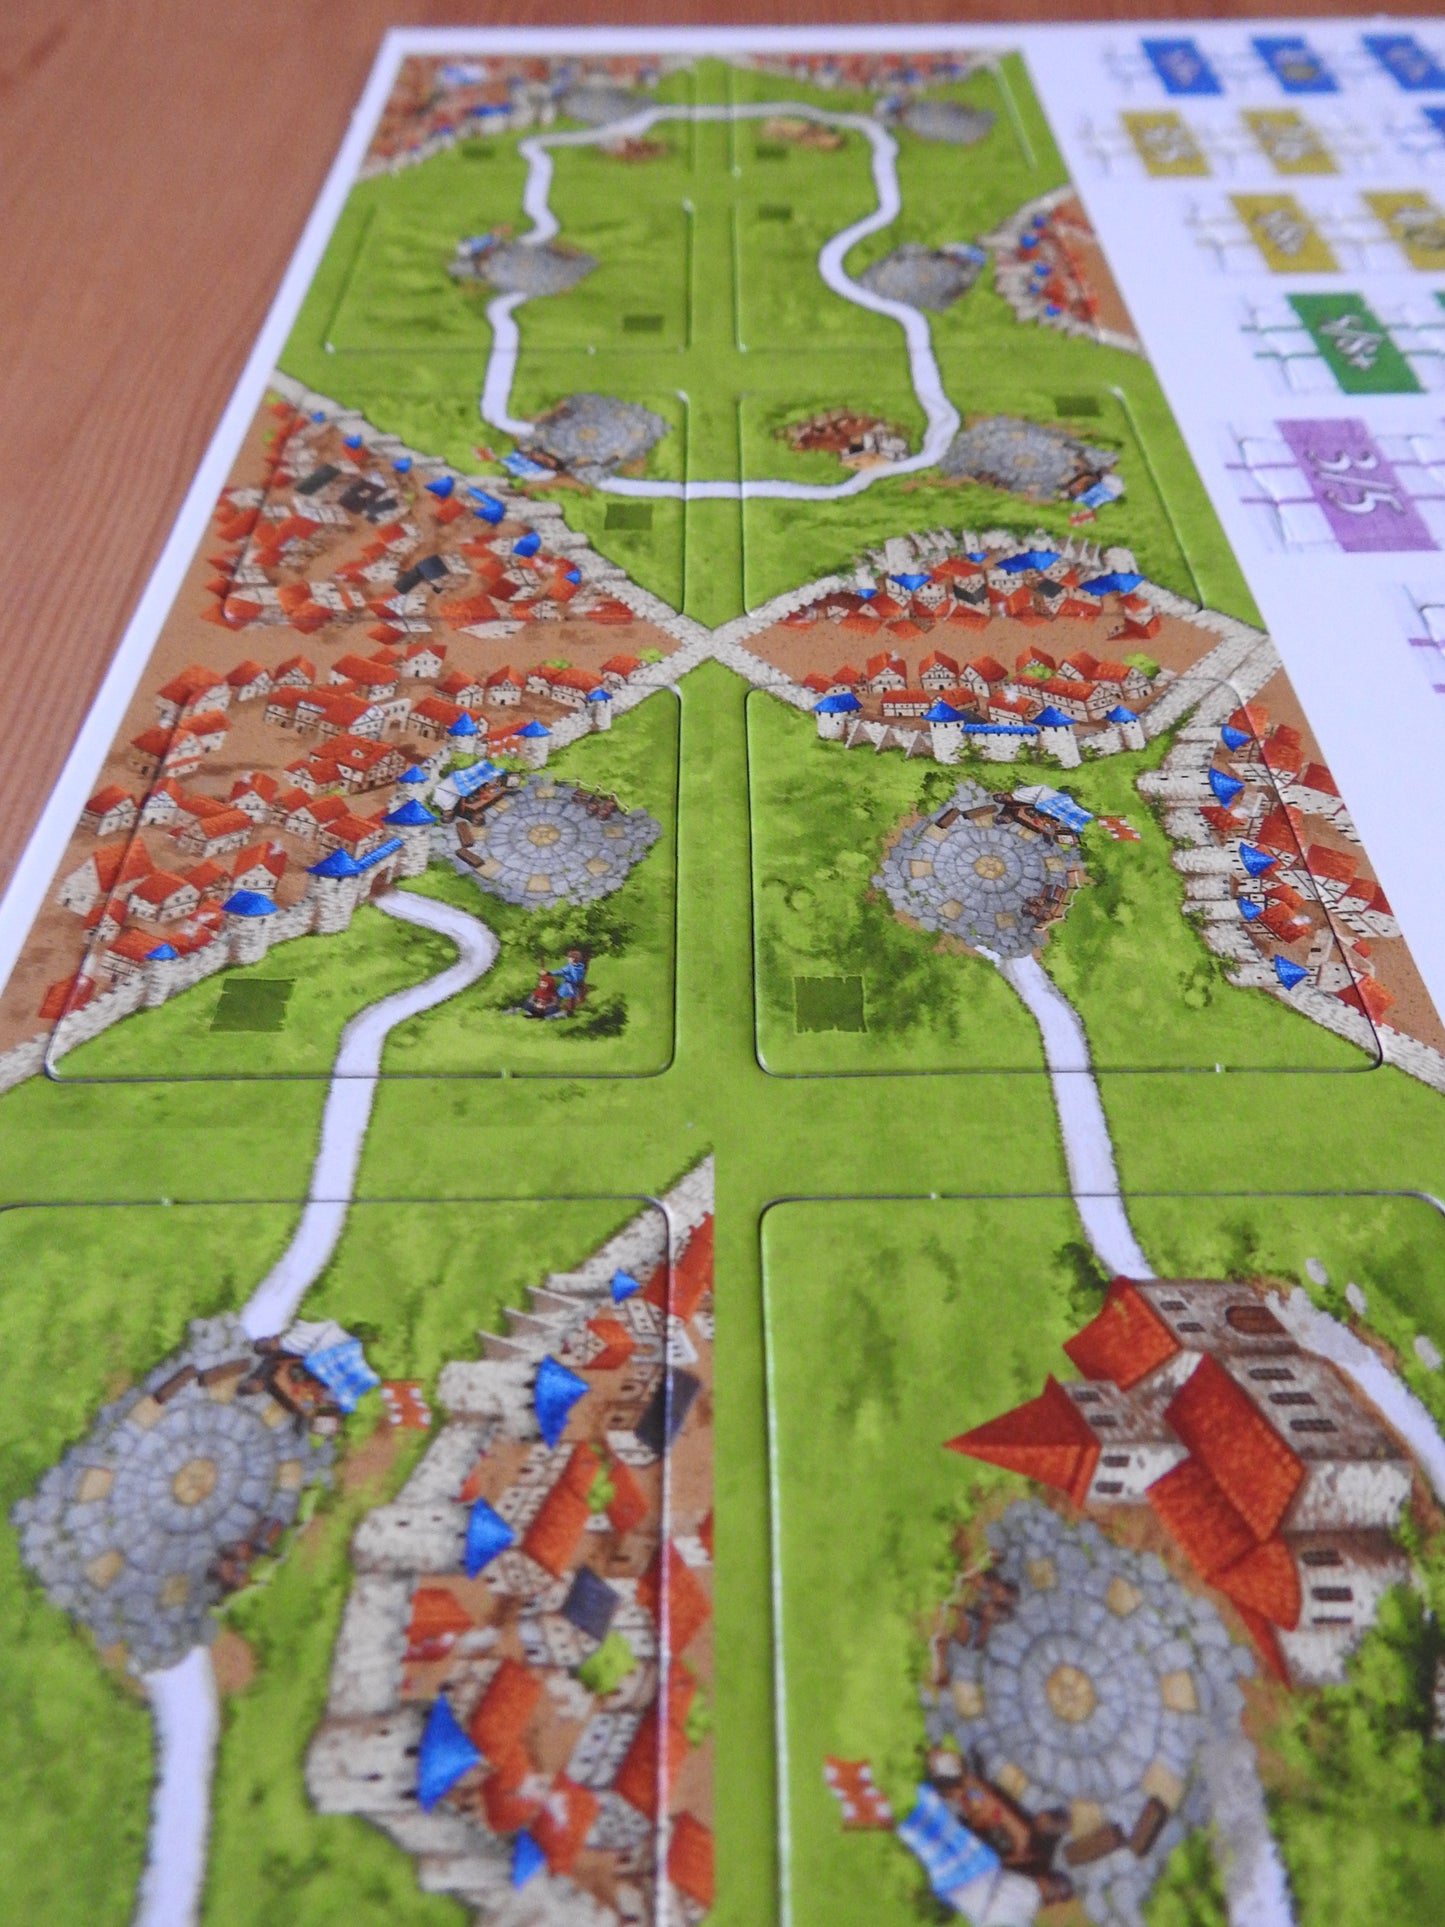 A closer view of all 10 of the included tiles in this Carcassonne Bets mini expansion.